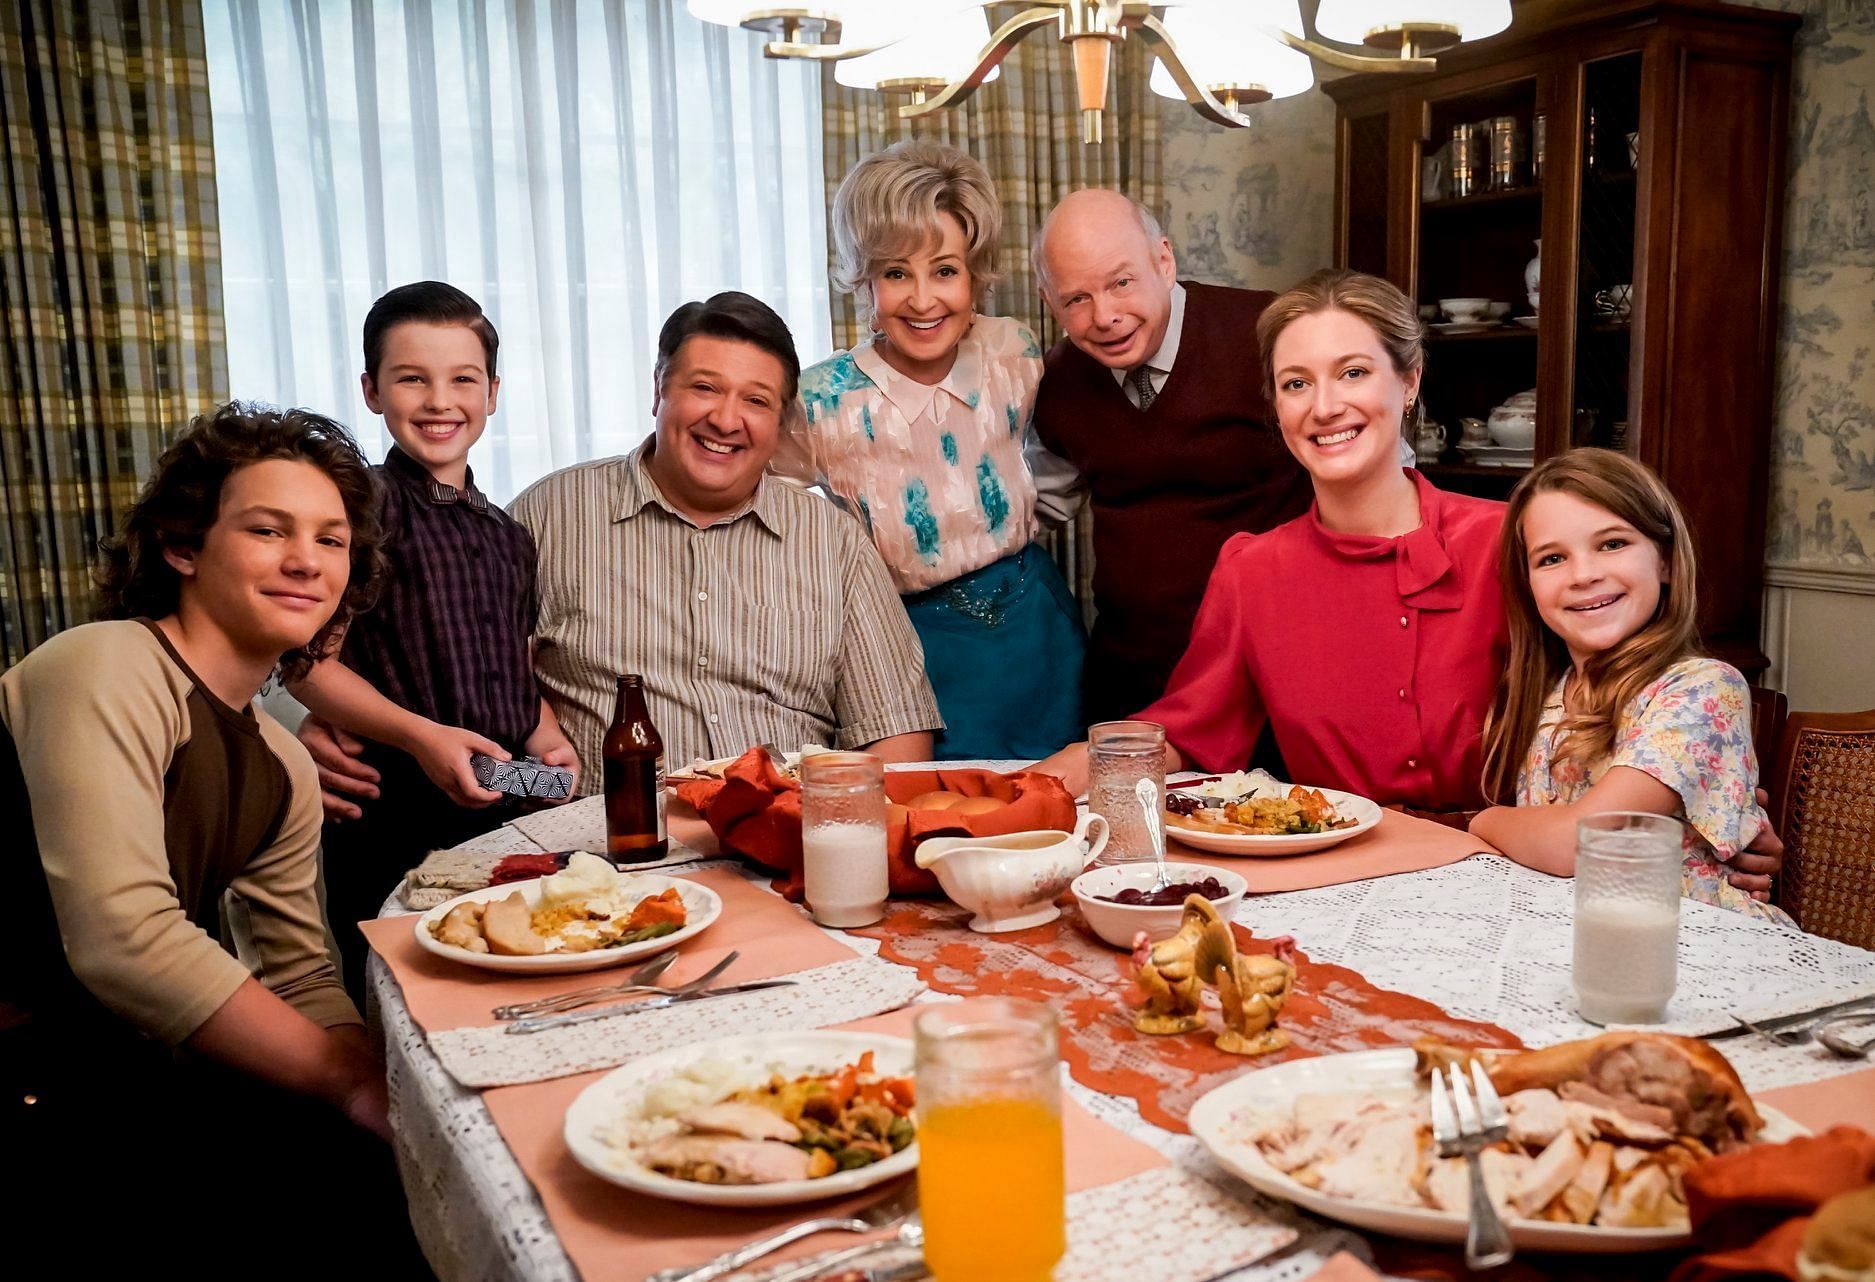 George Cooper as seen posing with his entire family from Young Sheldon (Image Via Facebook/@Young Sheldon)